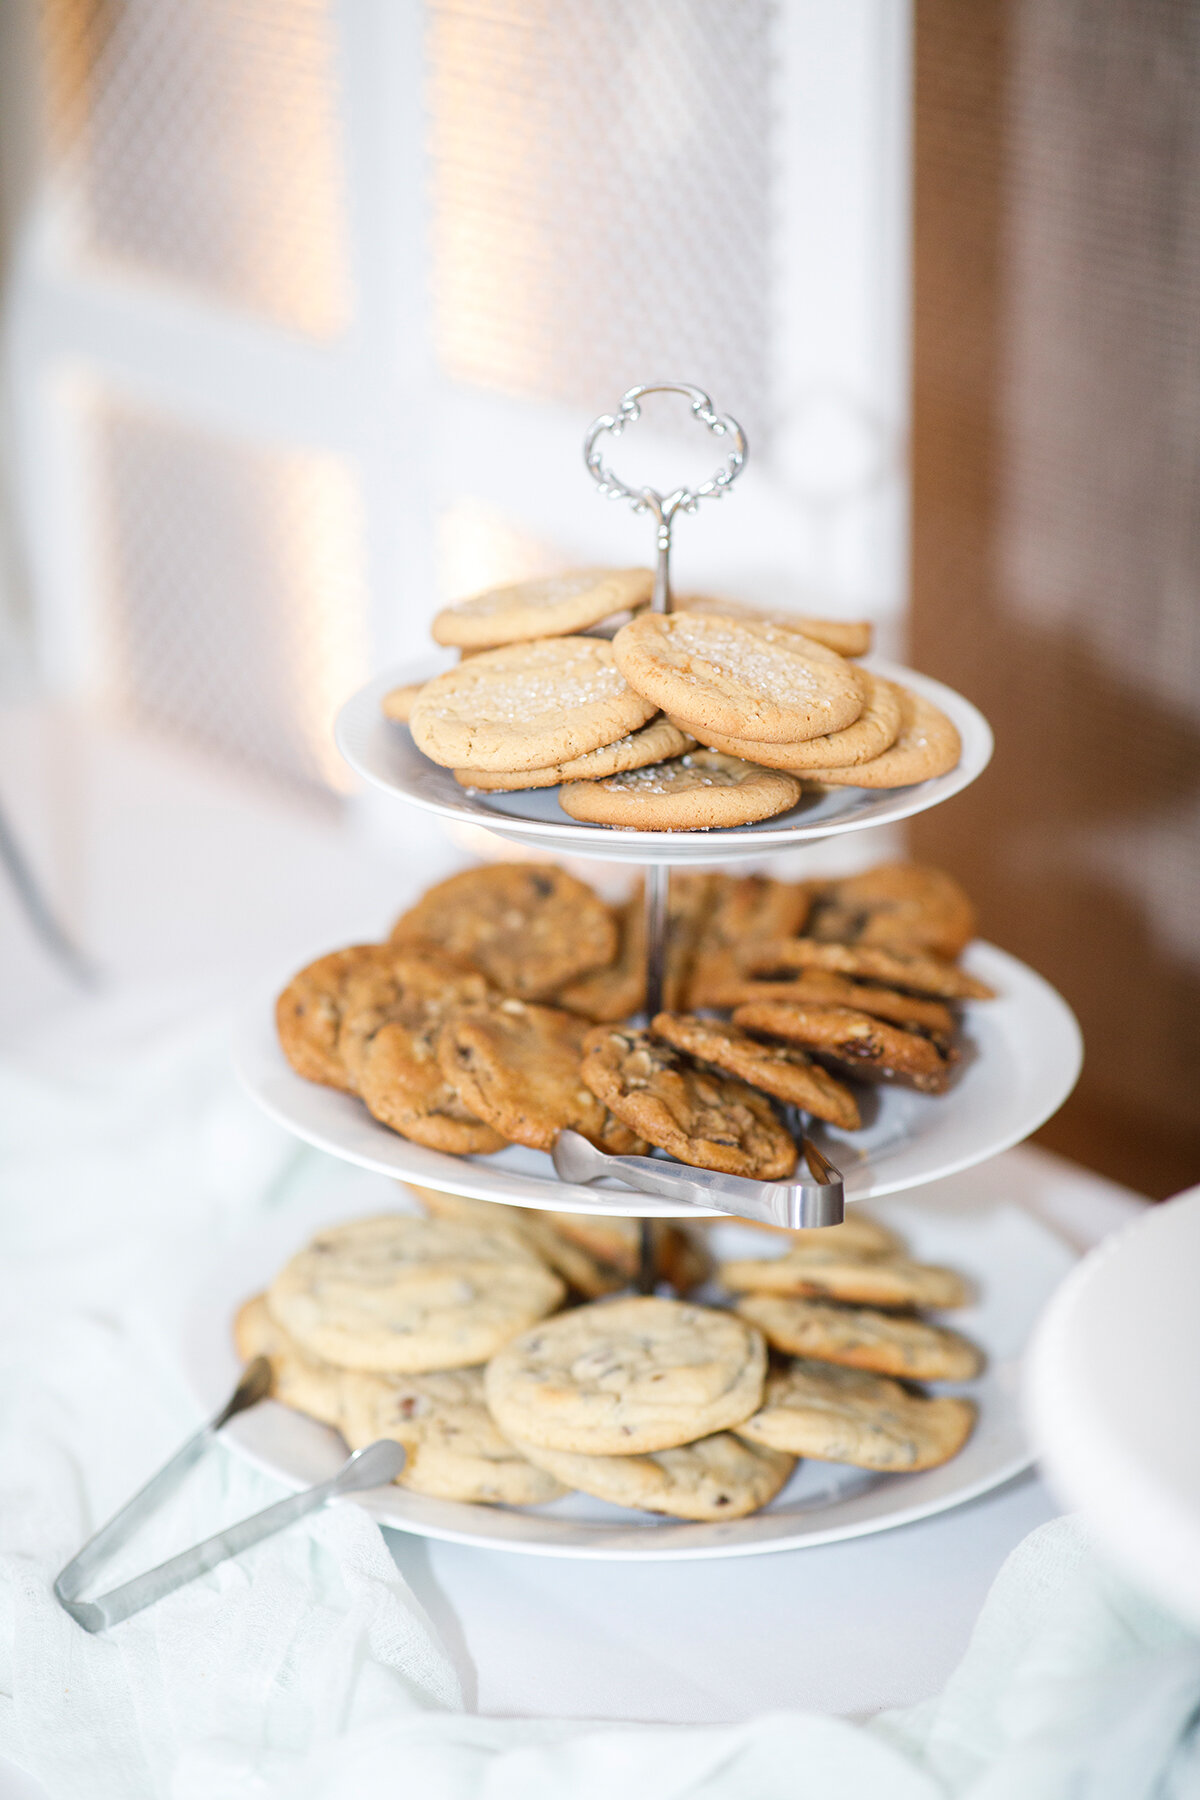  Wedding day plans often entail food! These tips will help you navigate all things wedding food related. wedding photographer Utah photographer Utah county photographer Clarity Lane Utah photographer professional wedding photographer wedding day Utah